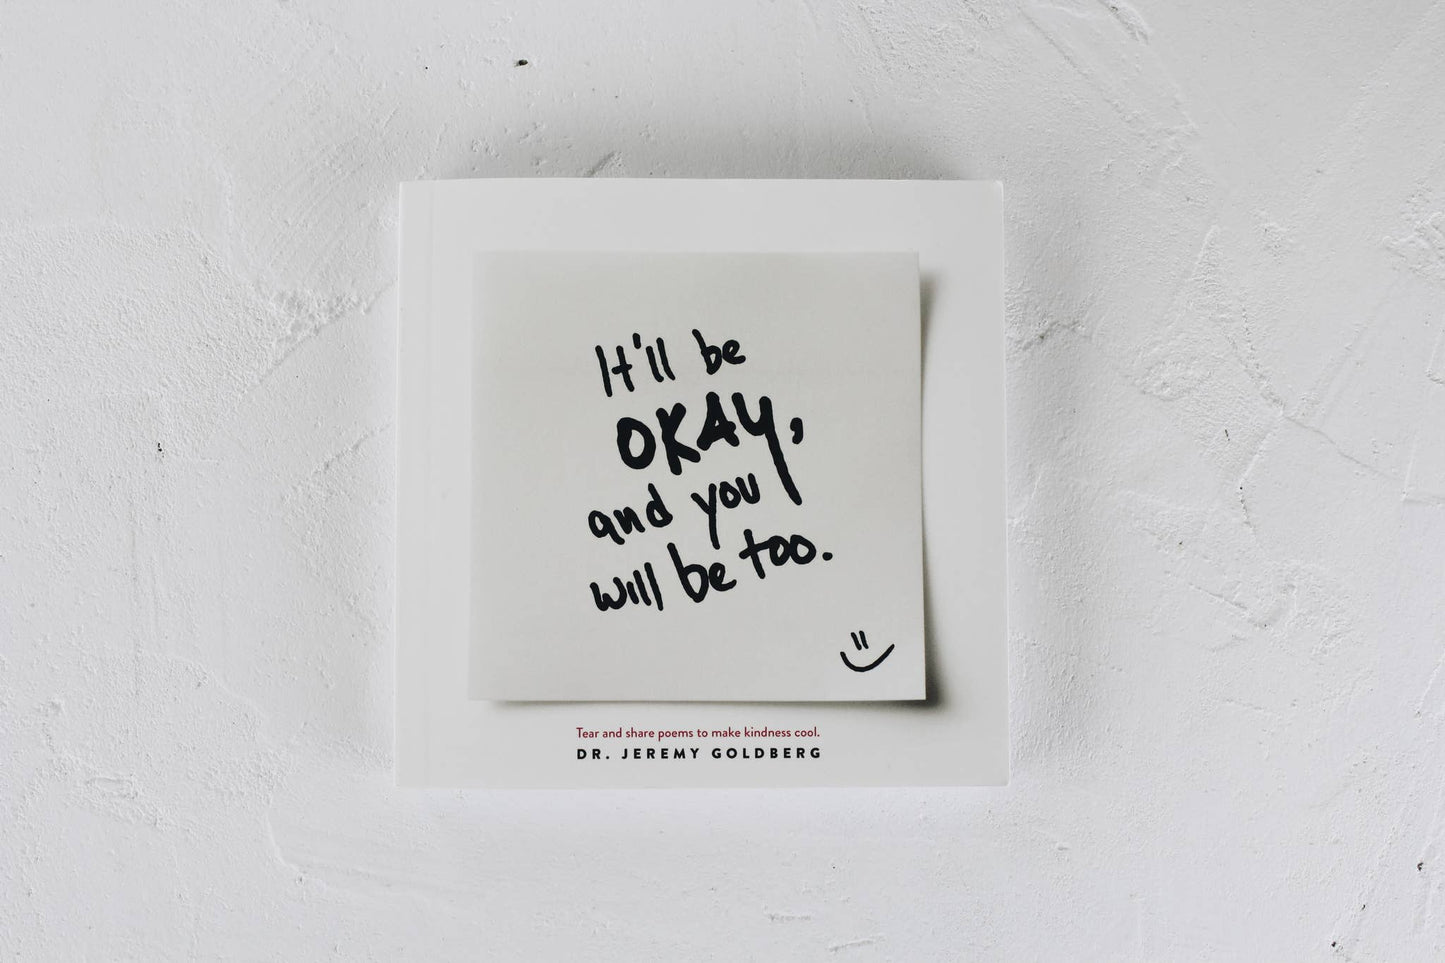 It'll Be Okay, And You Will Be Too - book